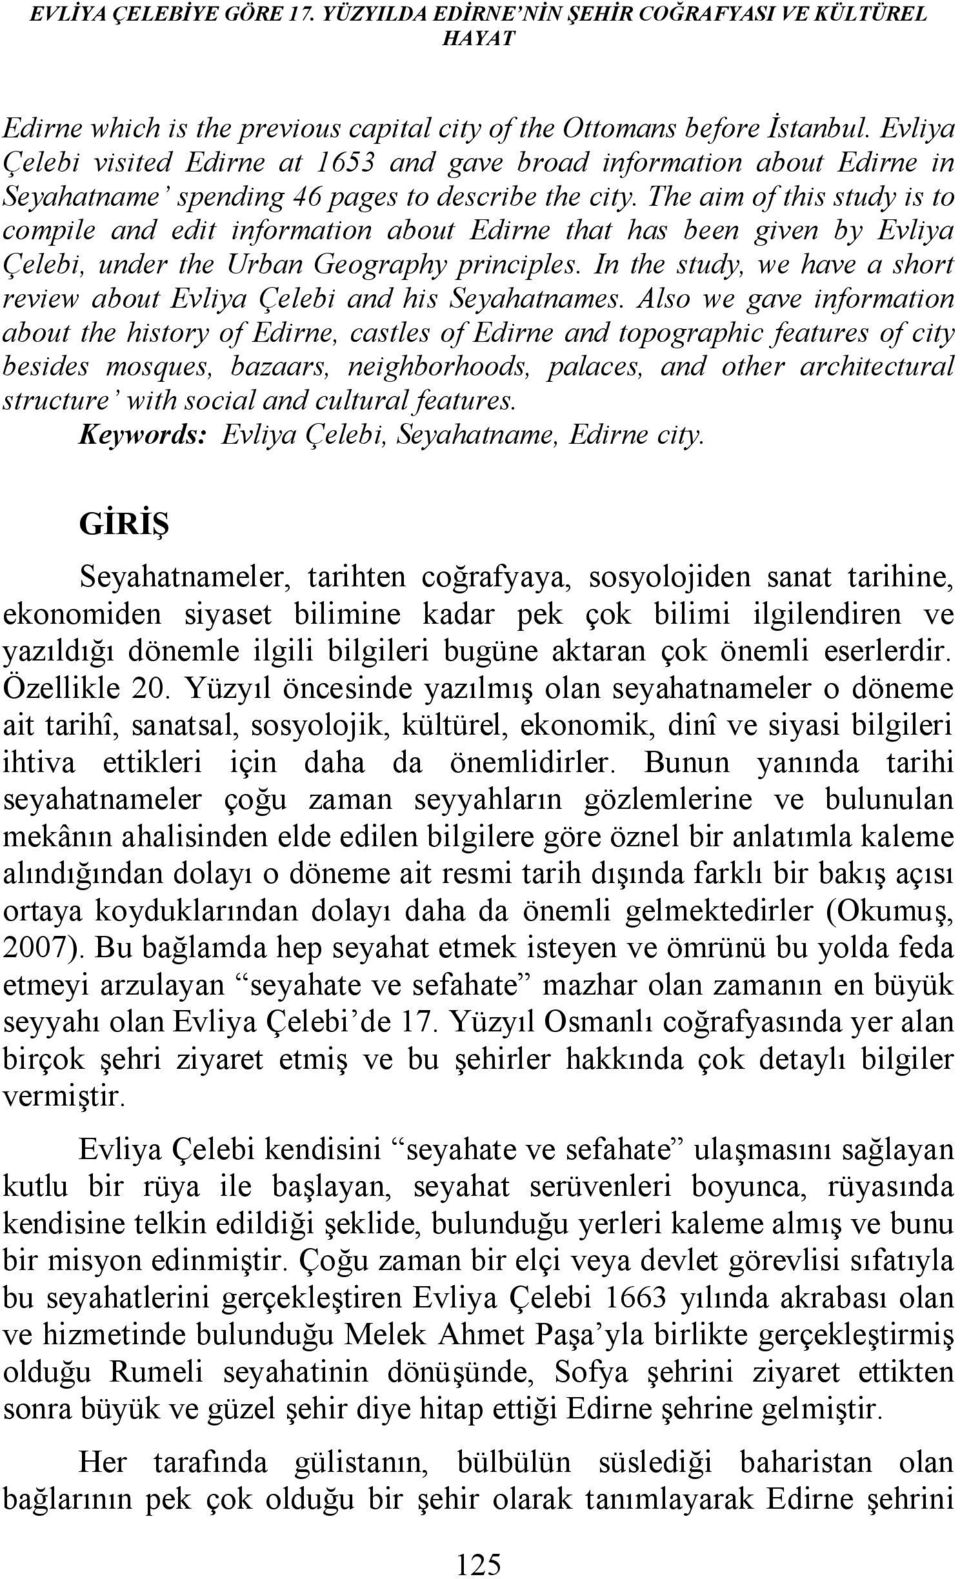 The aim of this study is to compile and edit information about Edirne that has been given by Evliya Çelebi, under the Urban Geography principles.